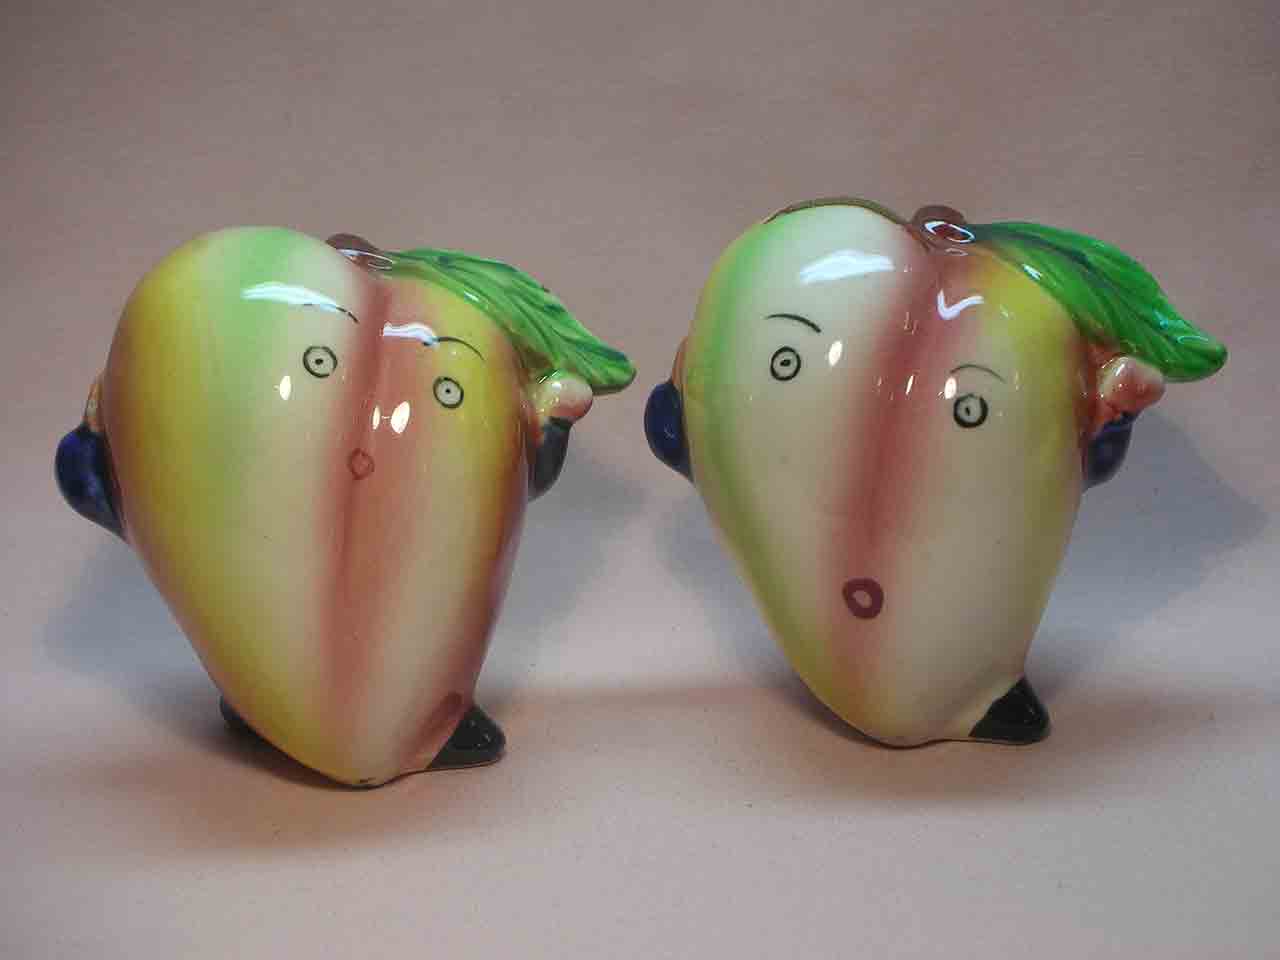 Teenie Weenie series of anthropomorphic mixed vegetables and fruit salt and pepper shakers - peaches